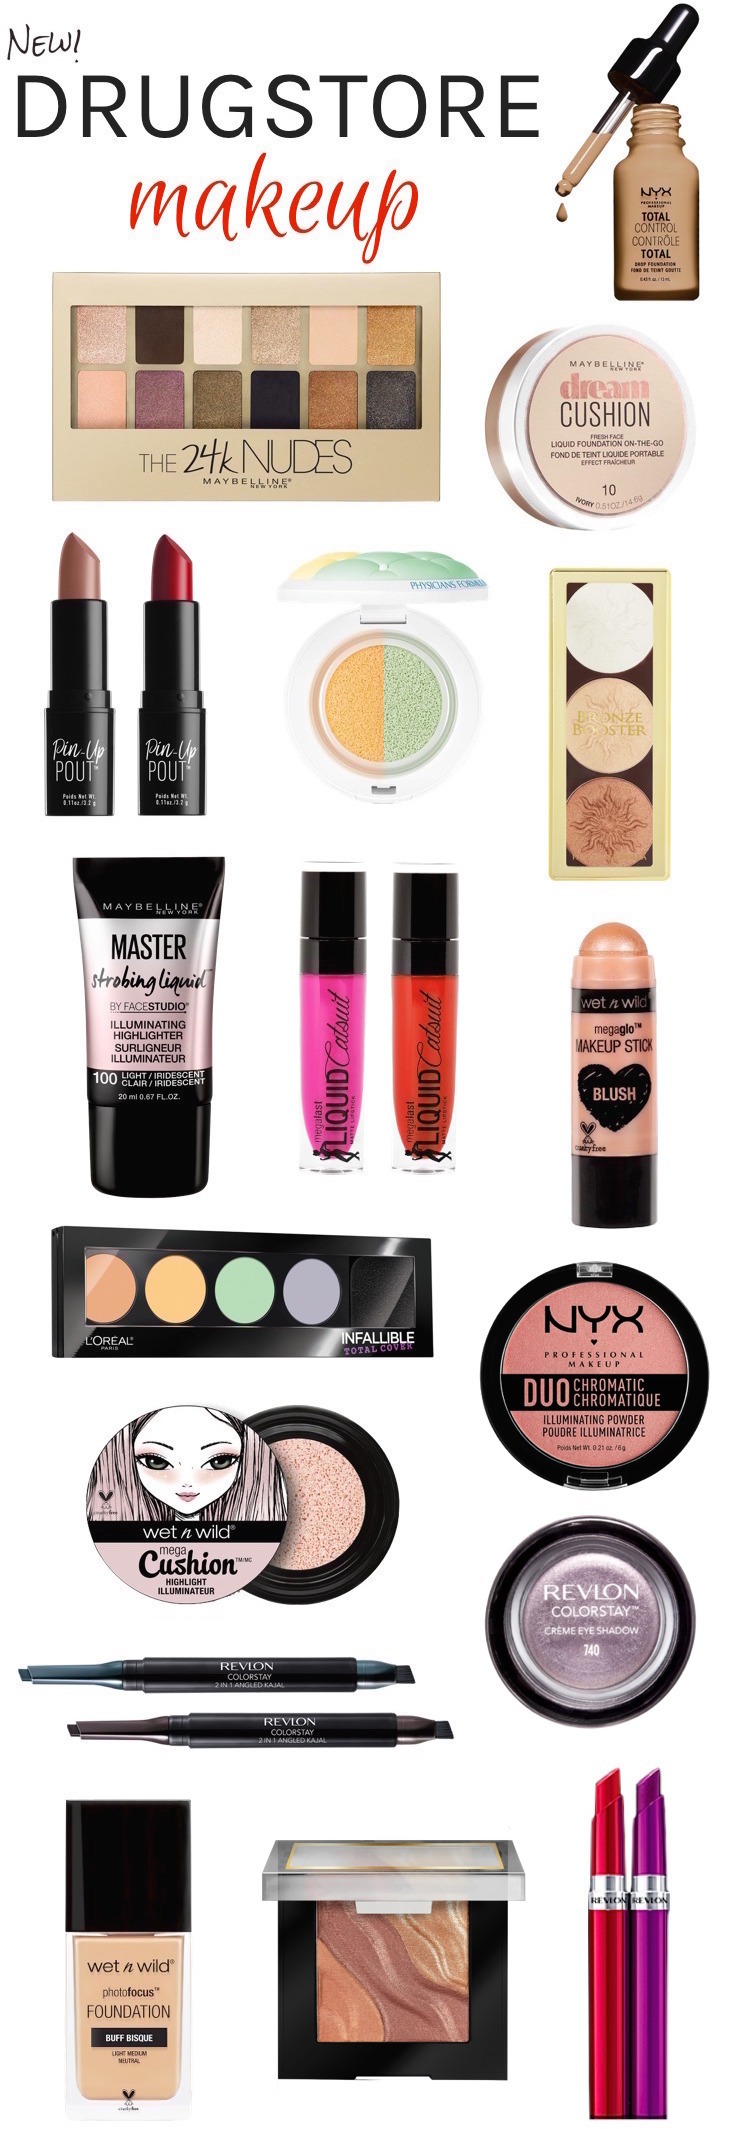  Kick off the new year with these exciting new drugstore makeup must-haves for 2017 - all under $17!